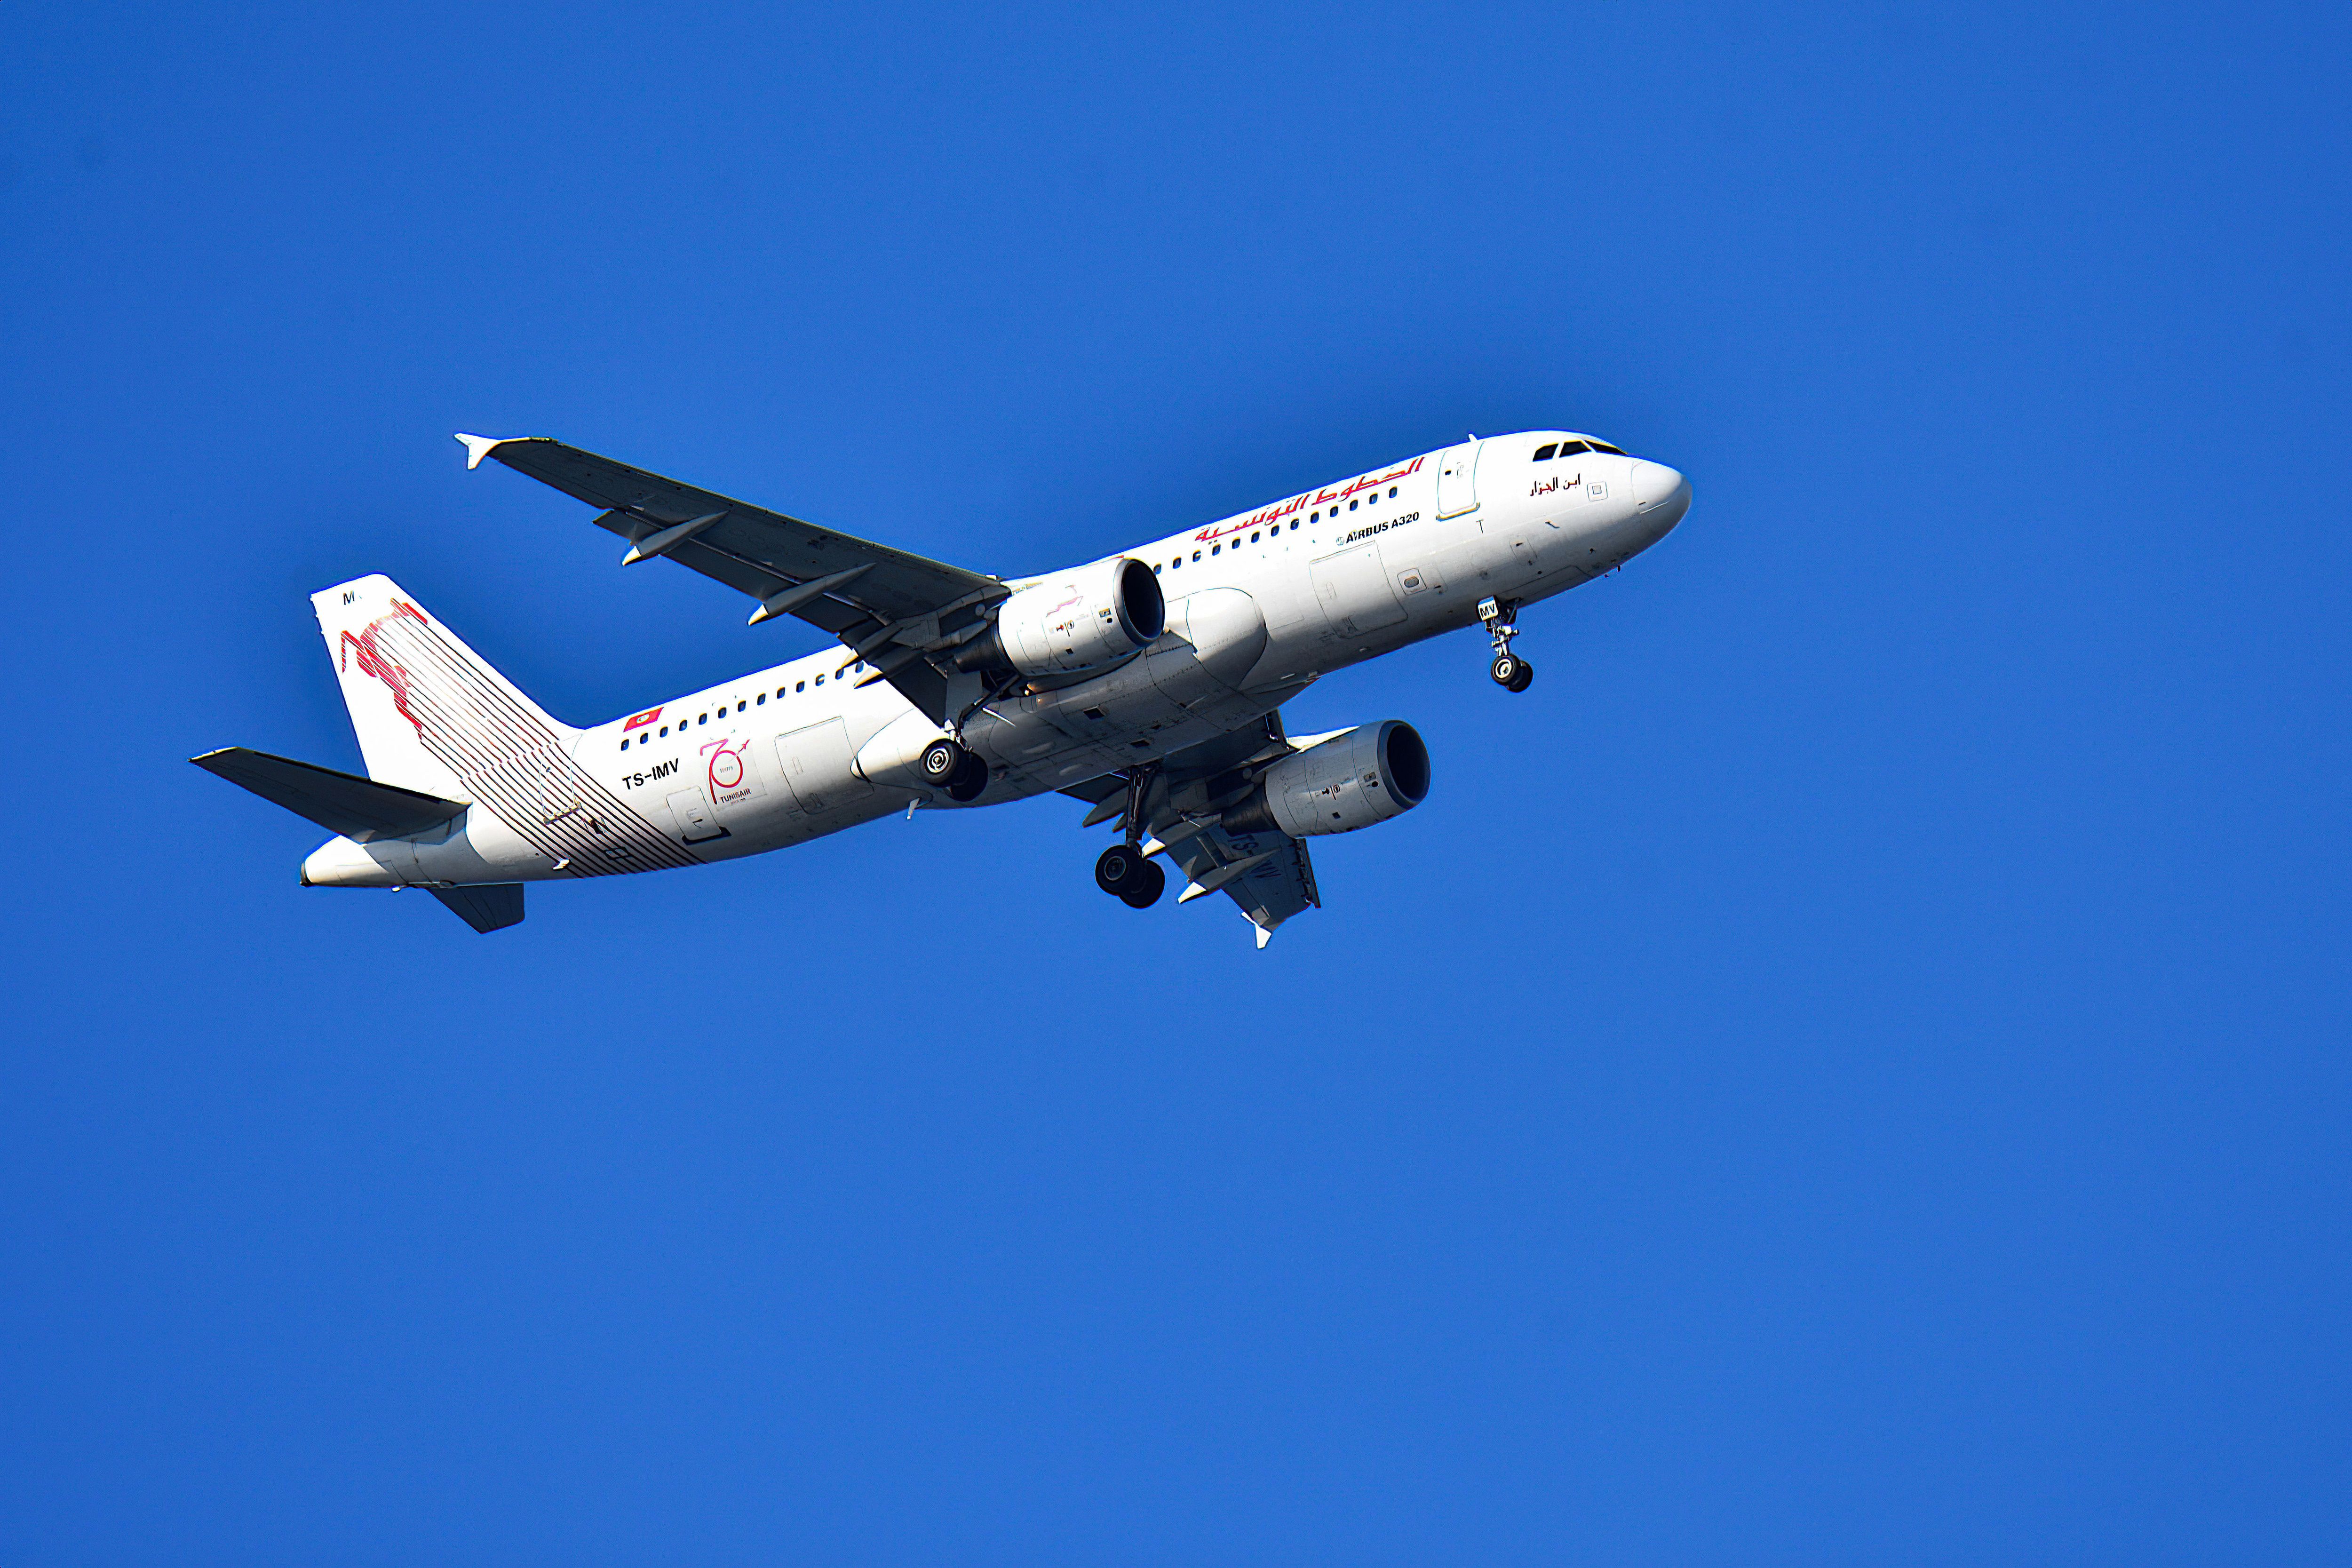 Tunisair Airbus A320-214 TS-IMV on approach to Marseille Airport